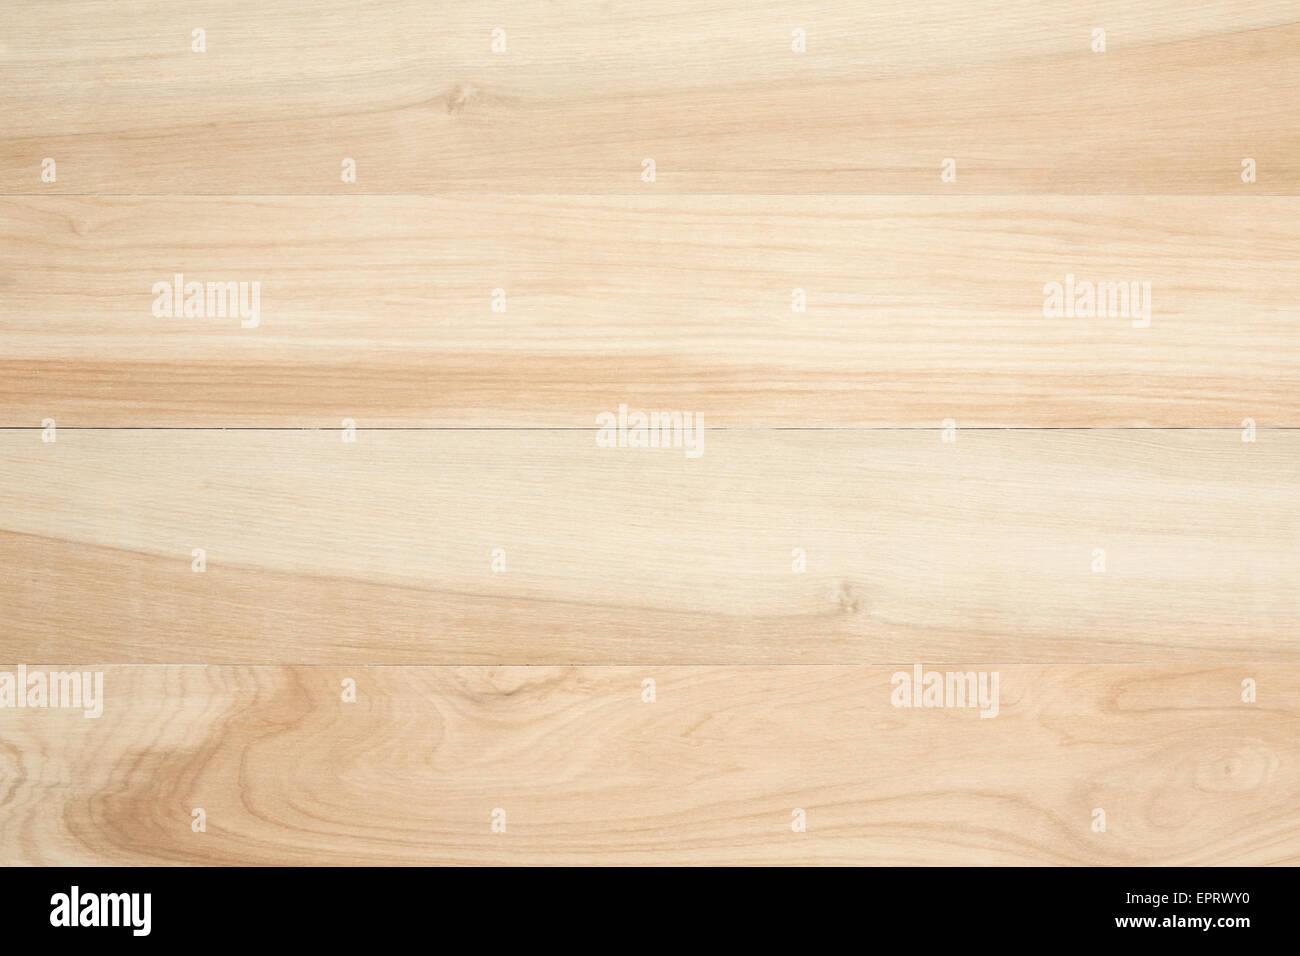 Wooden, rustic texture background Stock Photo